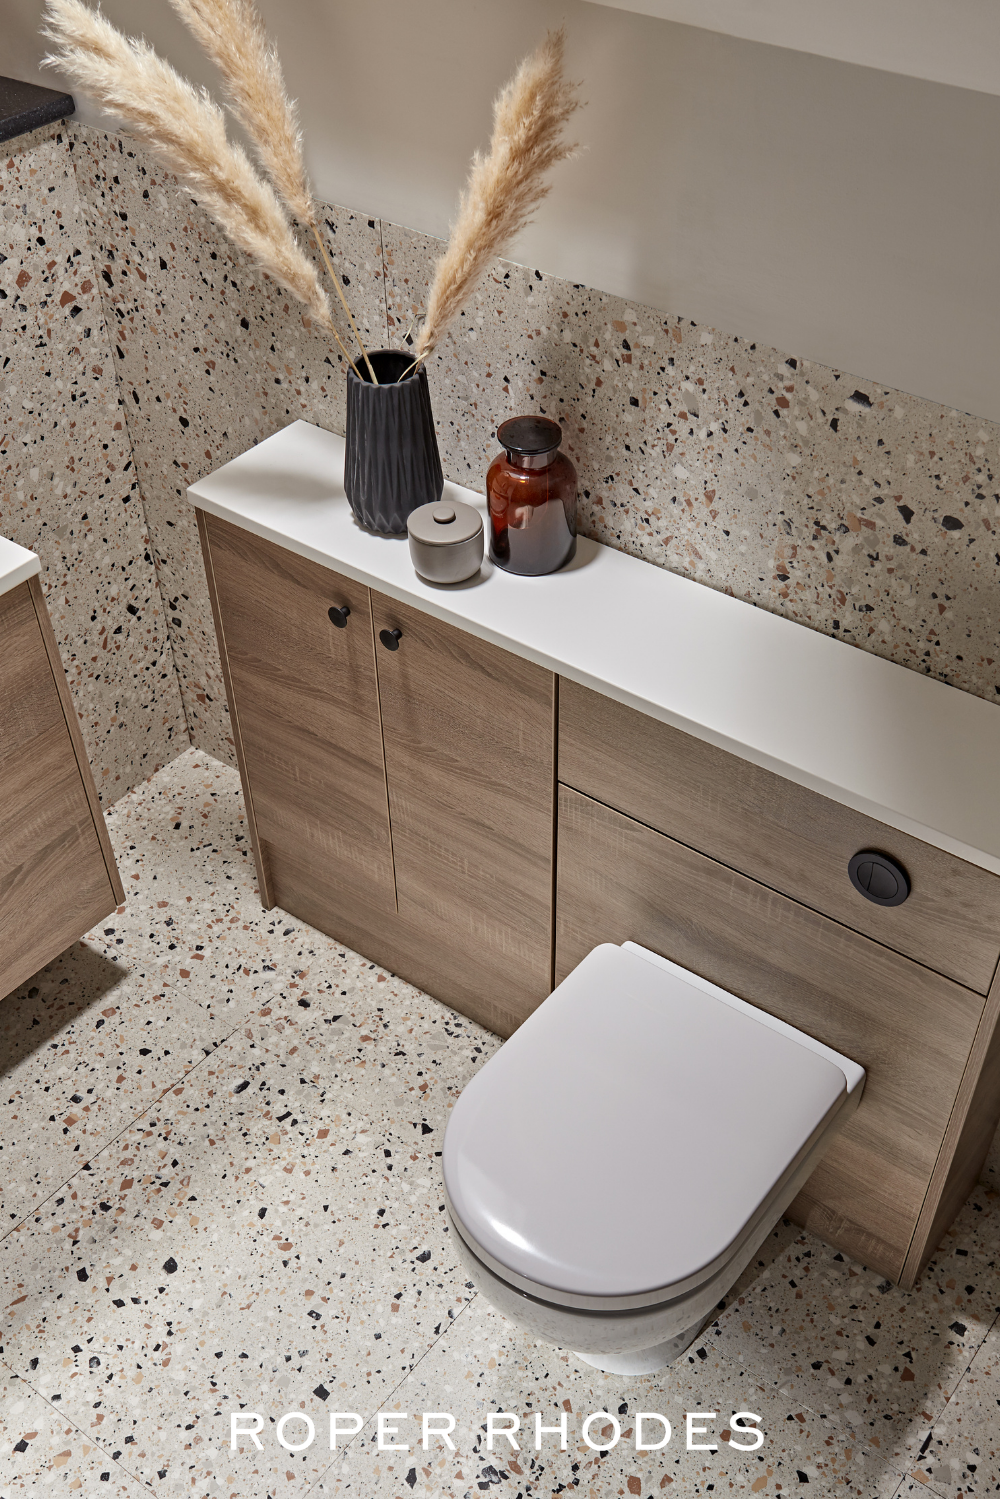 Try to fit the fitted bathroom furniture
to get modernized look